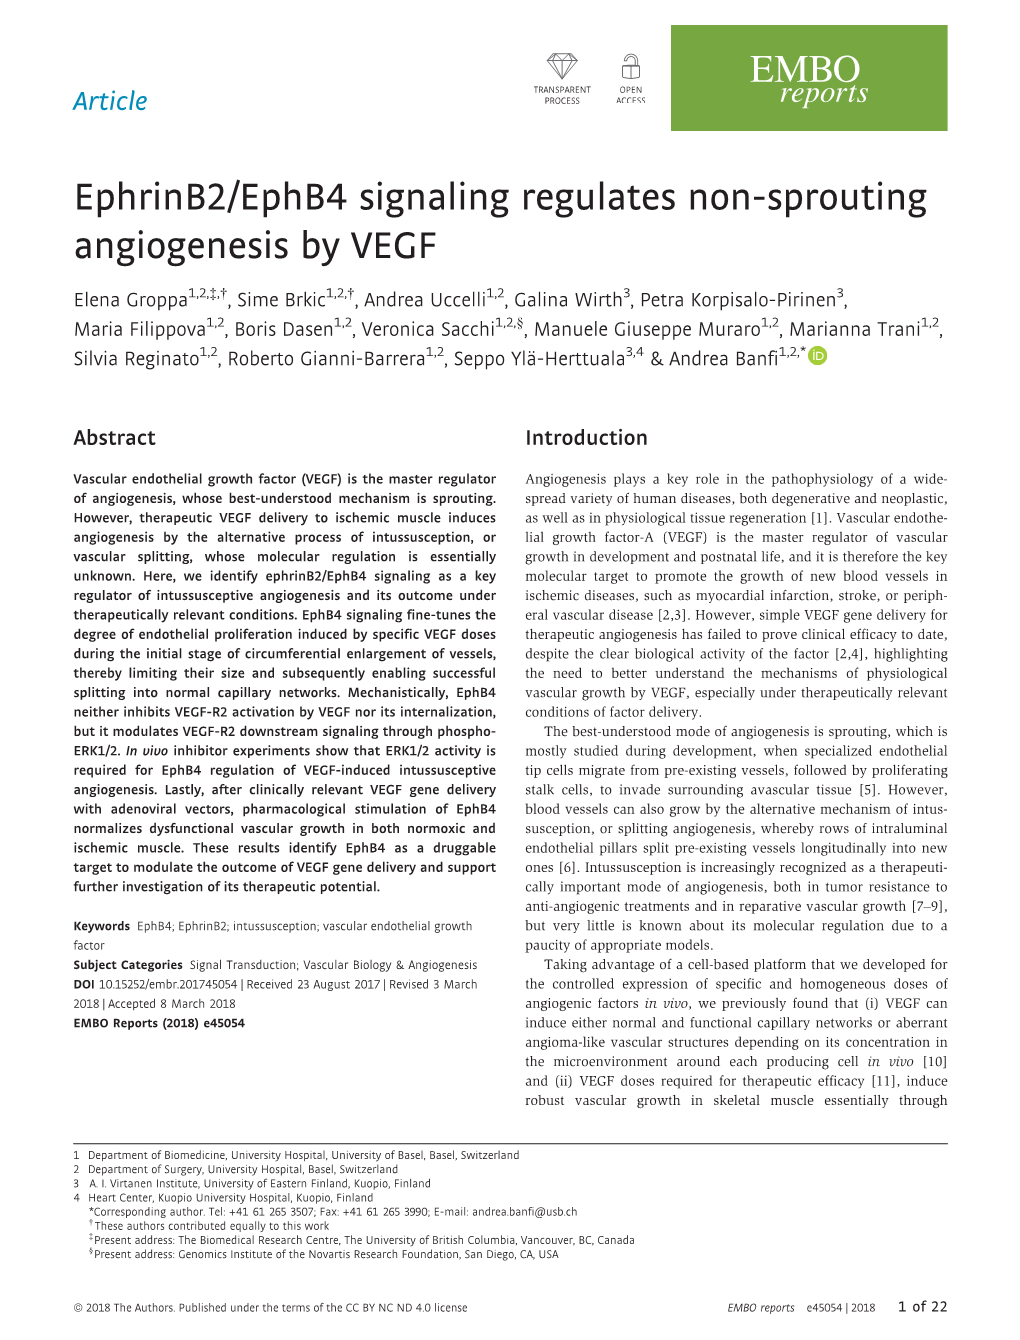 Ephrinb2/Ephb4 Signaling Regulates Non-Sprouting Angiogenesis by VEGF